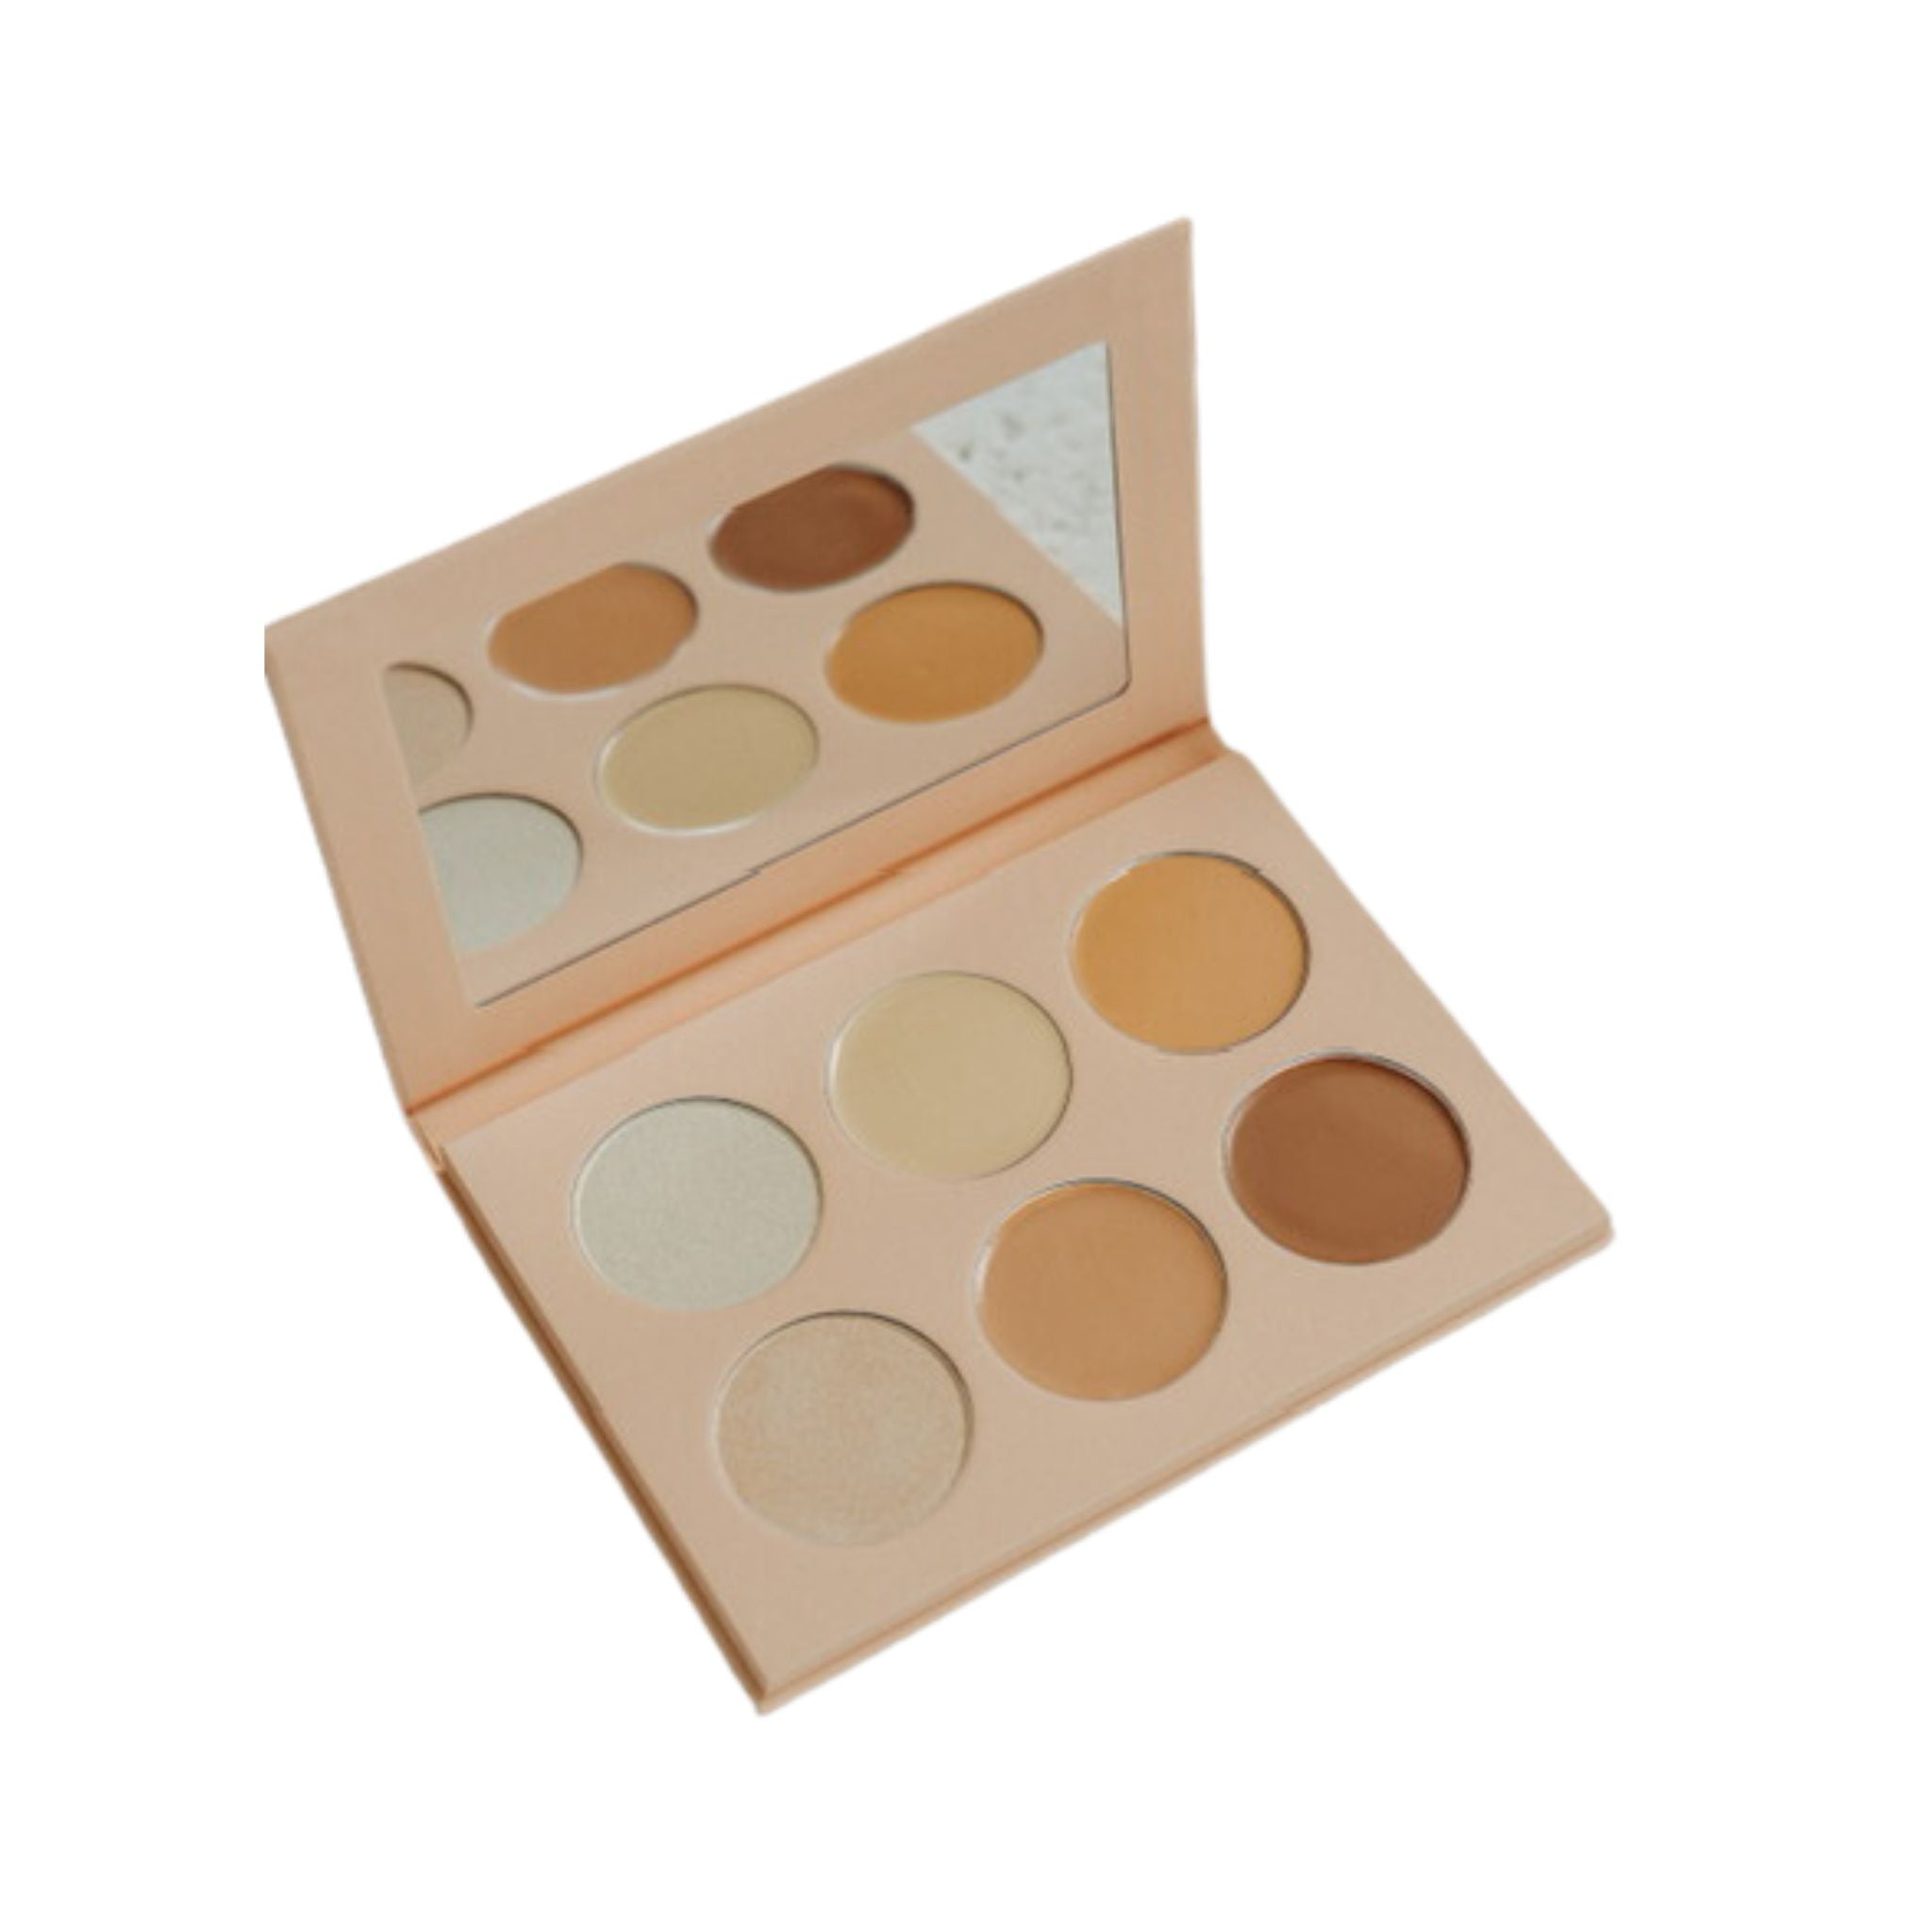 Standout Beauty Brow Concealer & Highlight Palette